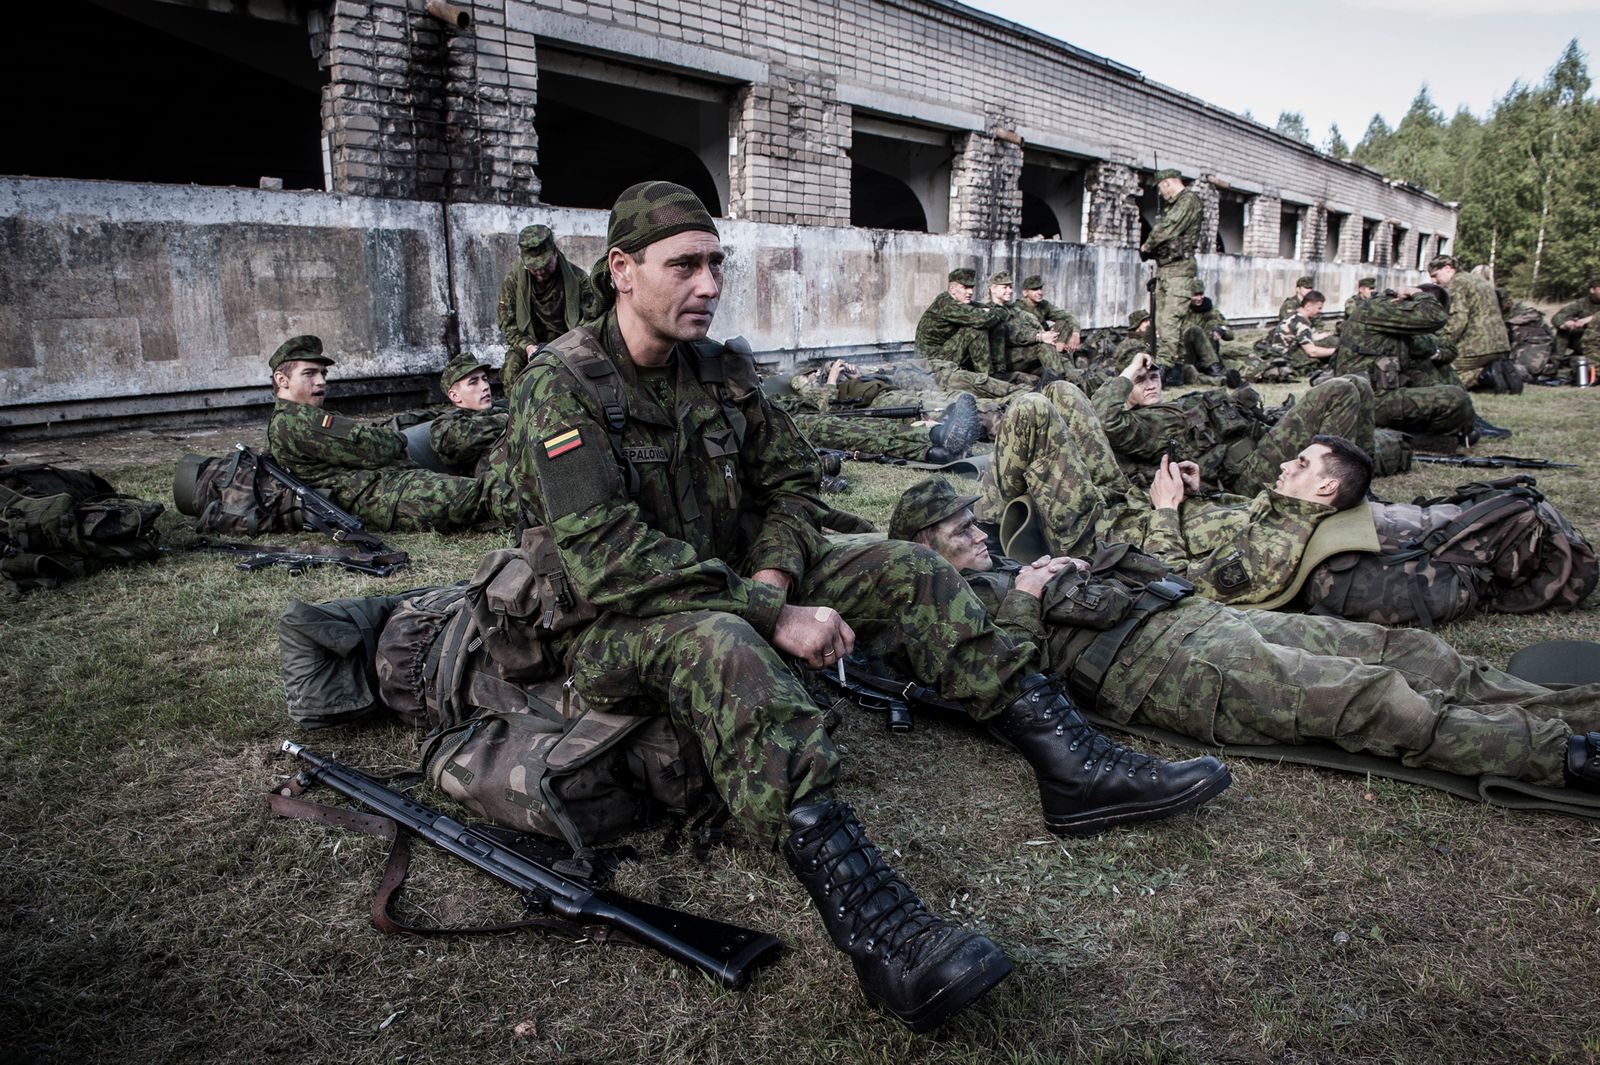 © Mattia Vacca - Young recruits rest in the surroundings of a dismantled Russian military base in the forests of Central Lithuania.